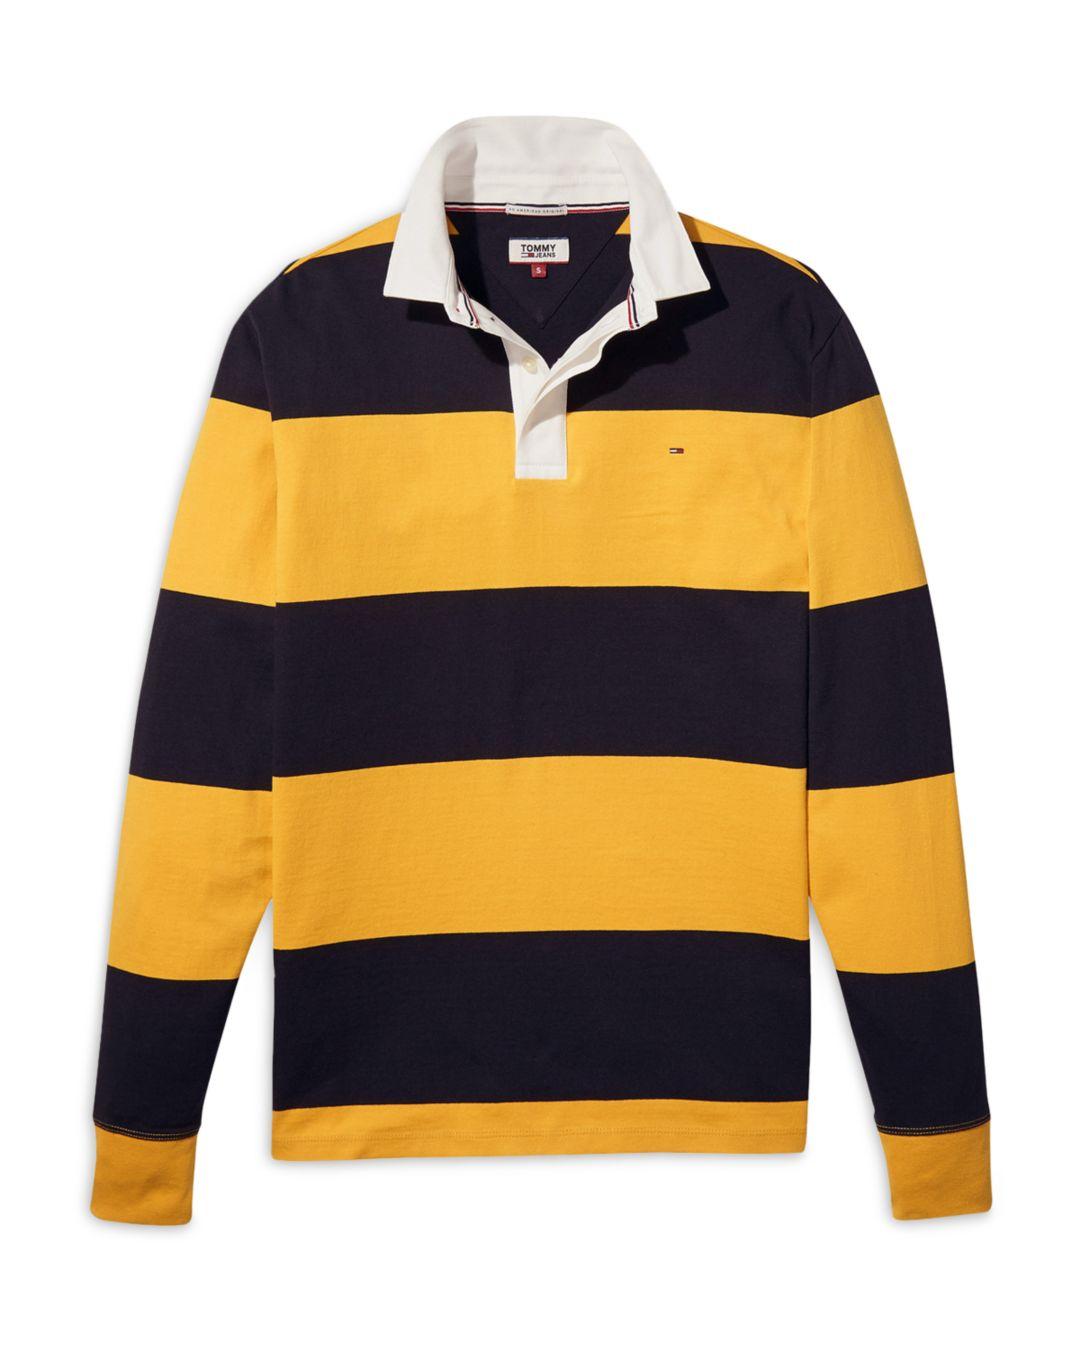 Rugby Tommy Hilfiger Clearance Stores, 52% OFF | evanstoncinci.org